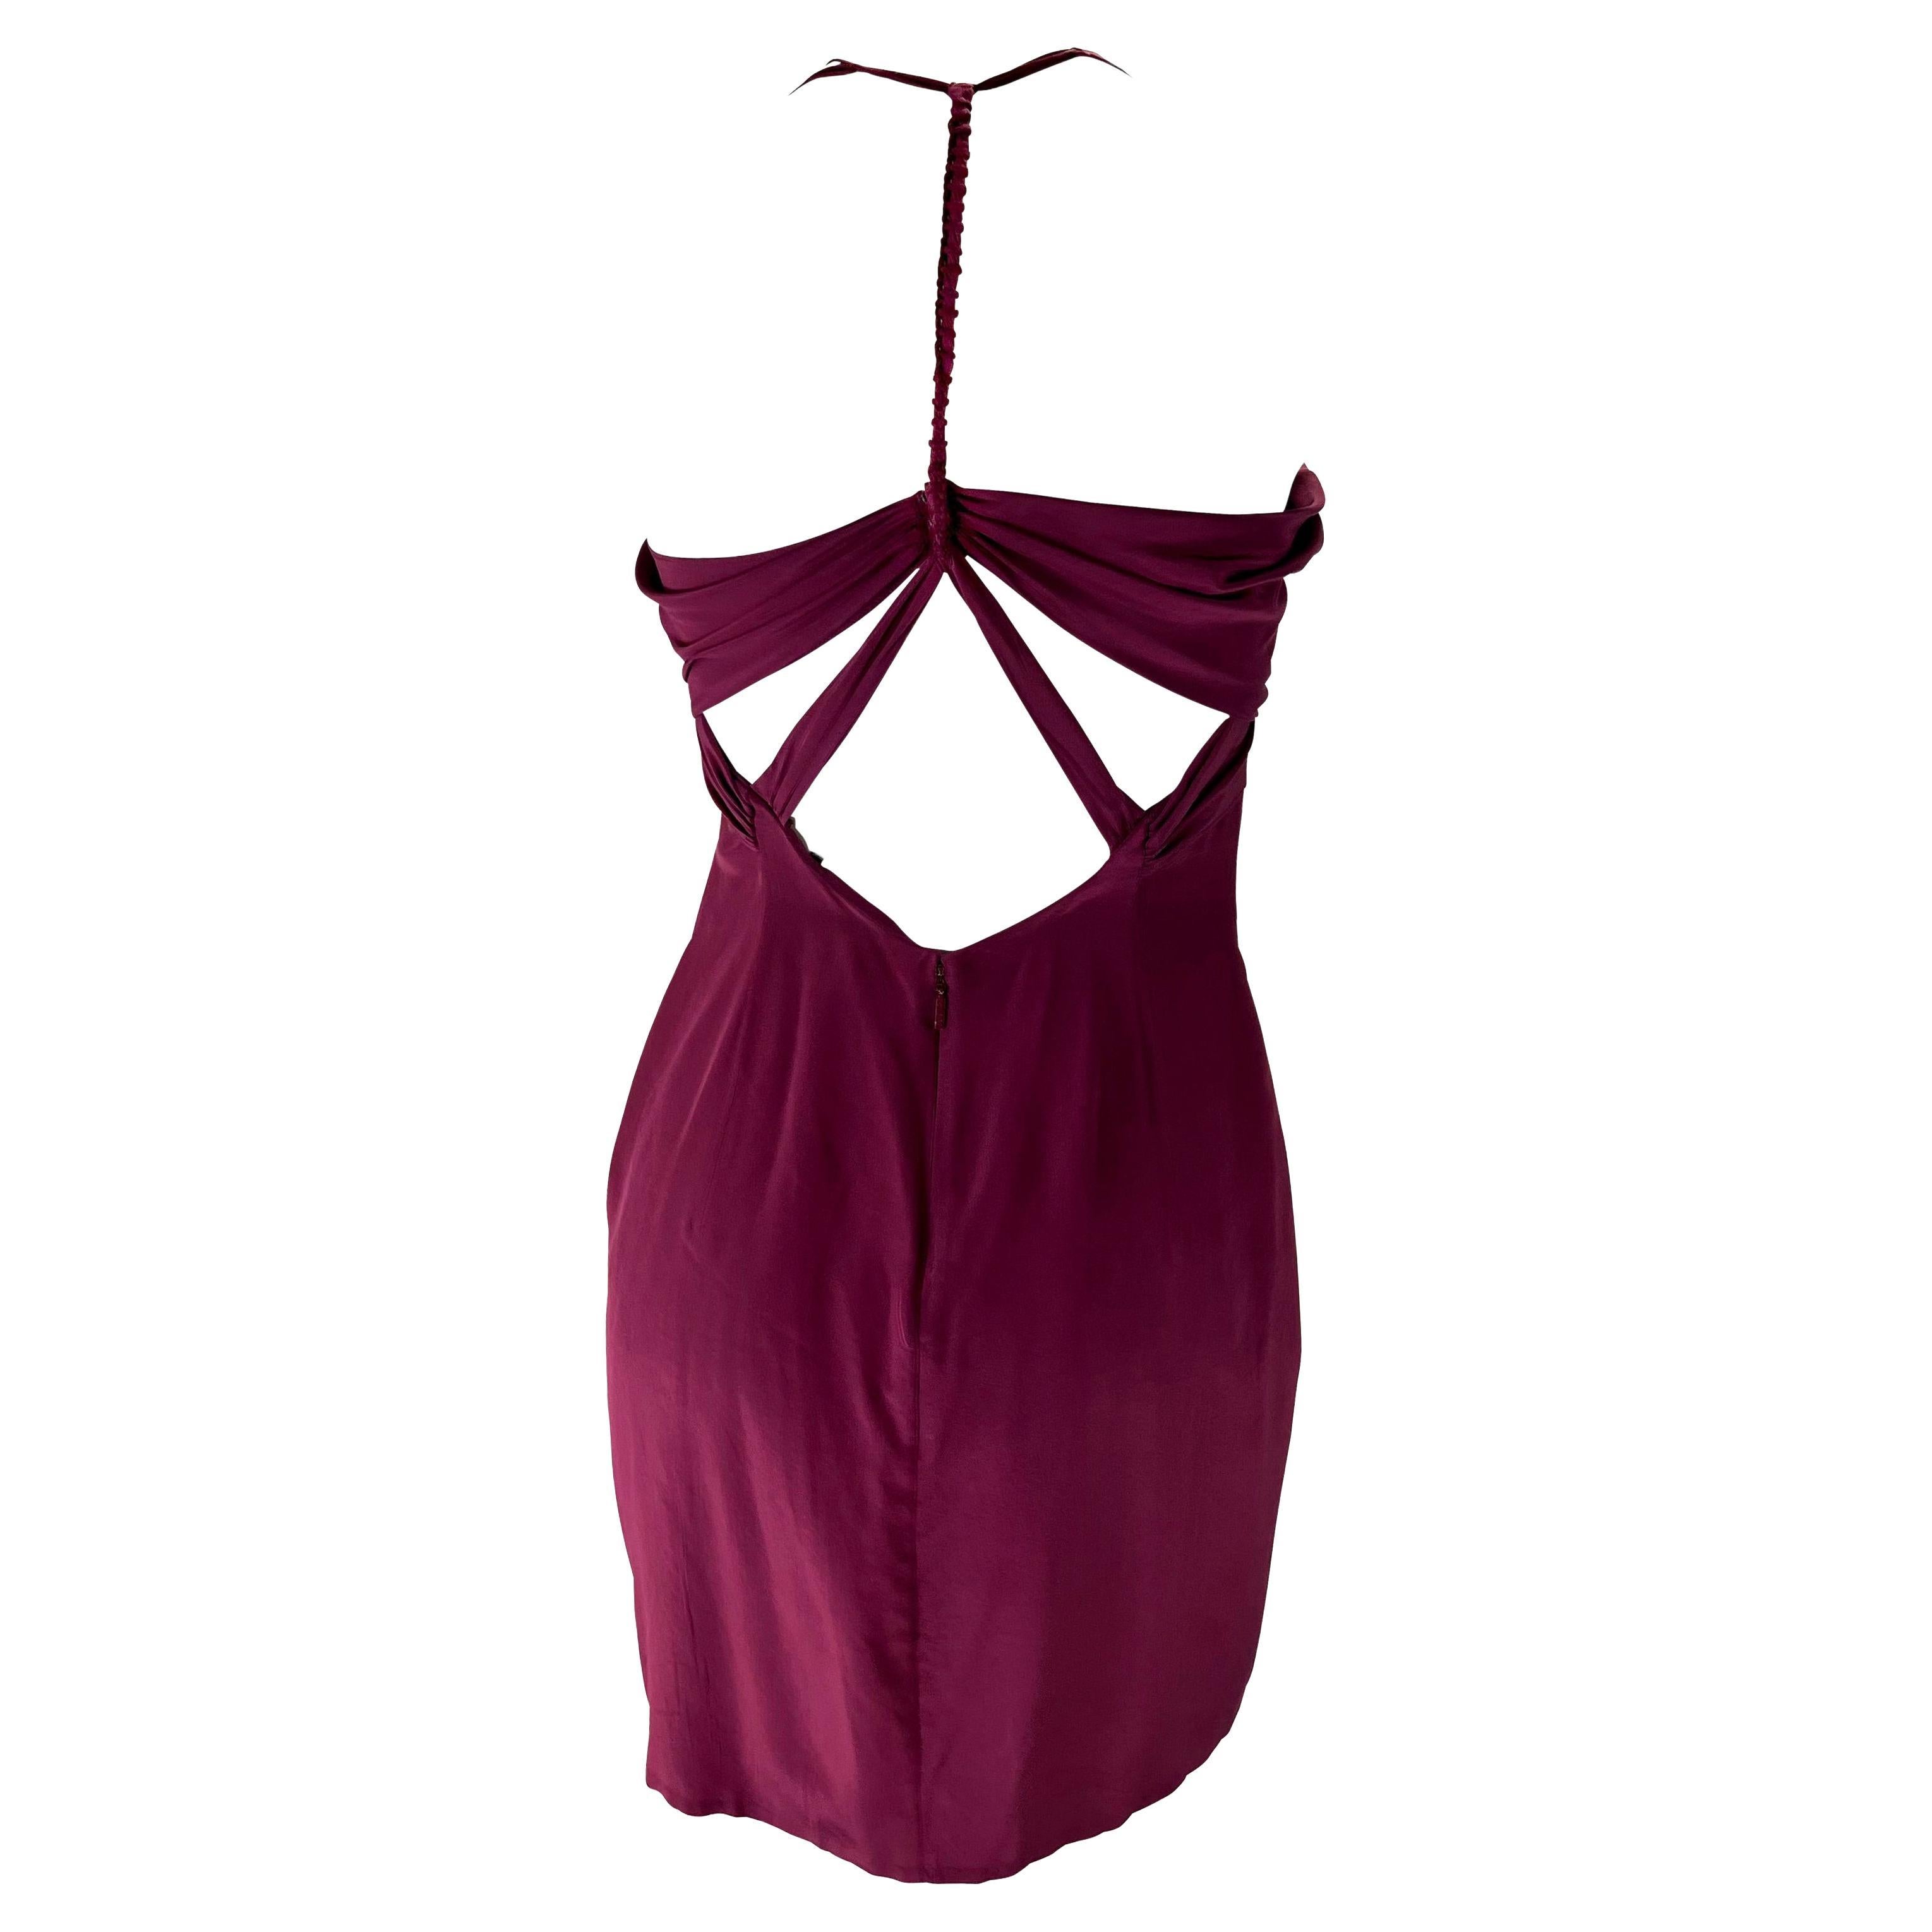 F/W 2002 Gucci by Tom Ford Maroon Strappy Silk Chiffon Mini Dress In Good Condition For Sale In West Hollywood, CA